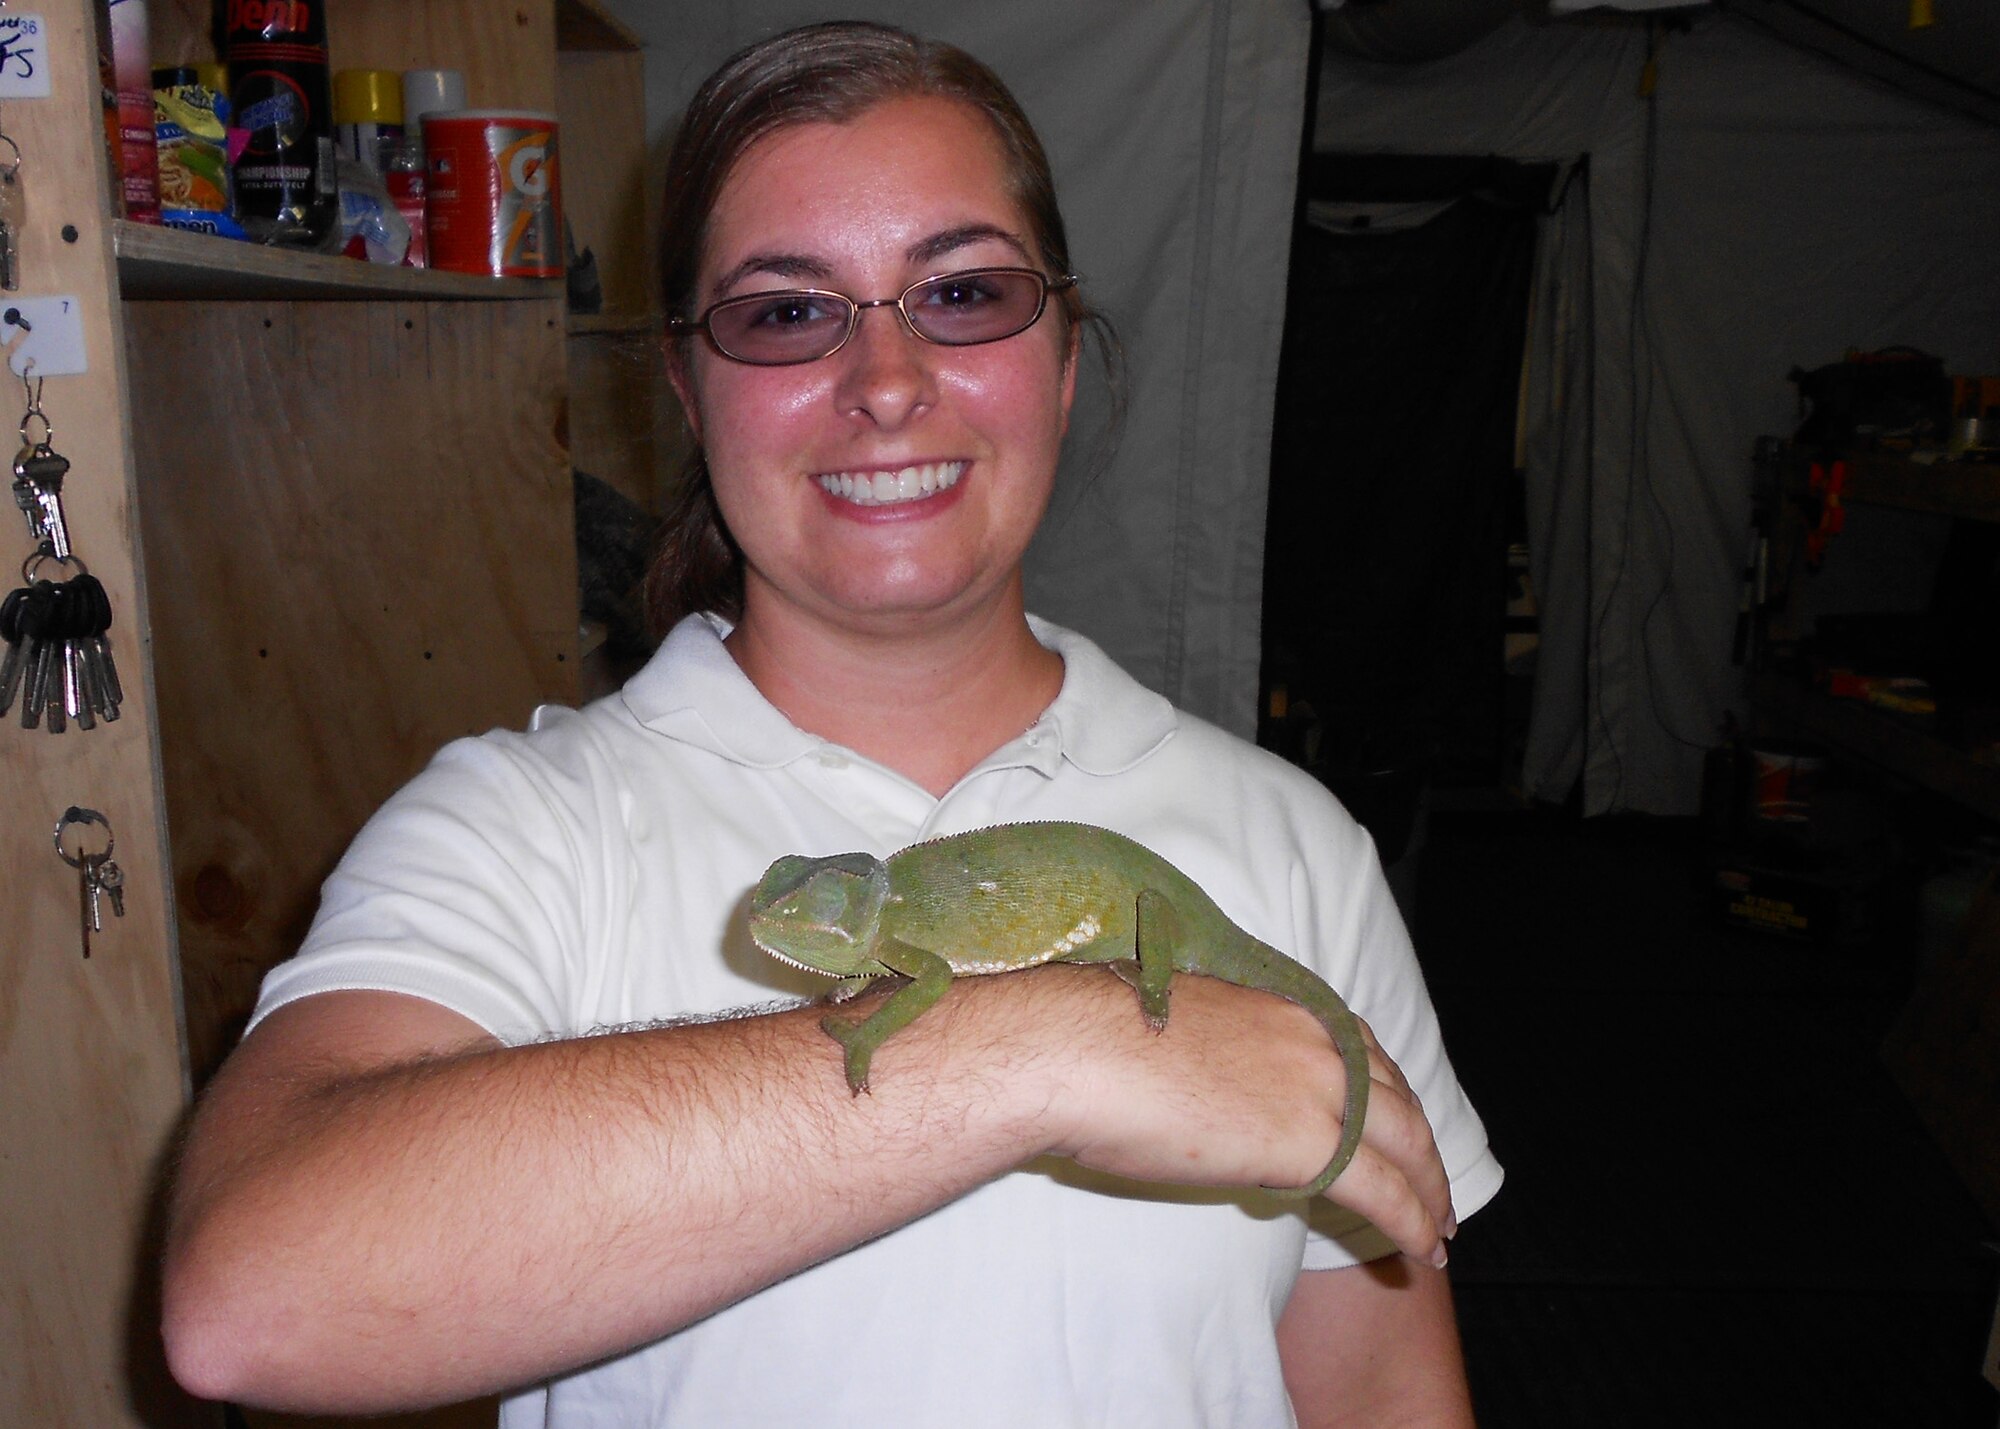 Air Force Reserve Master Sgt. Jennifer Alexander displays a chameleon she recently found at her deployed location.  In her duties as the deployed pest control manager for a U.S. Africa Command forward operating base, the Duke Field civil engineering Airman often works with host nation military officials to eliminate dangerous wildlife hazards and ensure non-threatening wildlife found on and near her base are safely returned to the wild. (Courtesy photo)